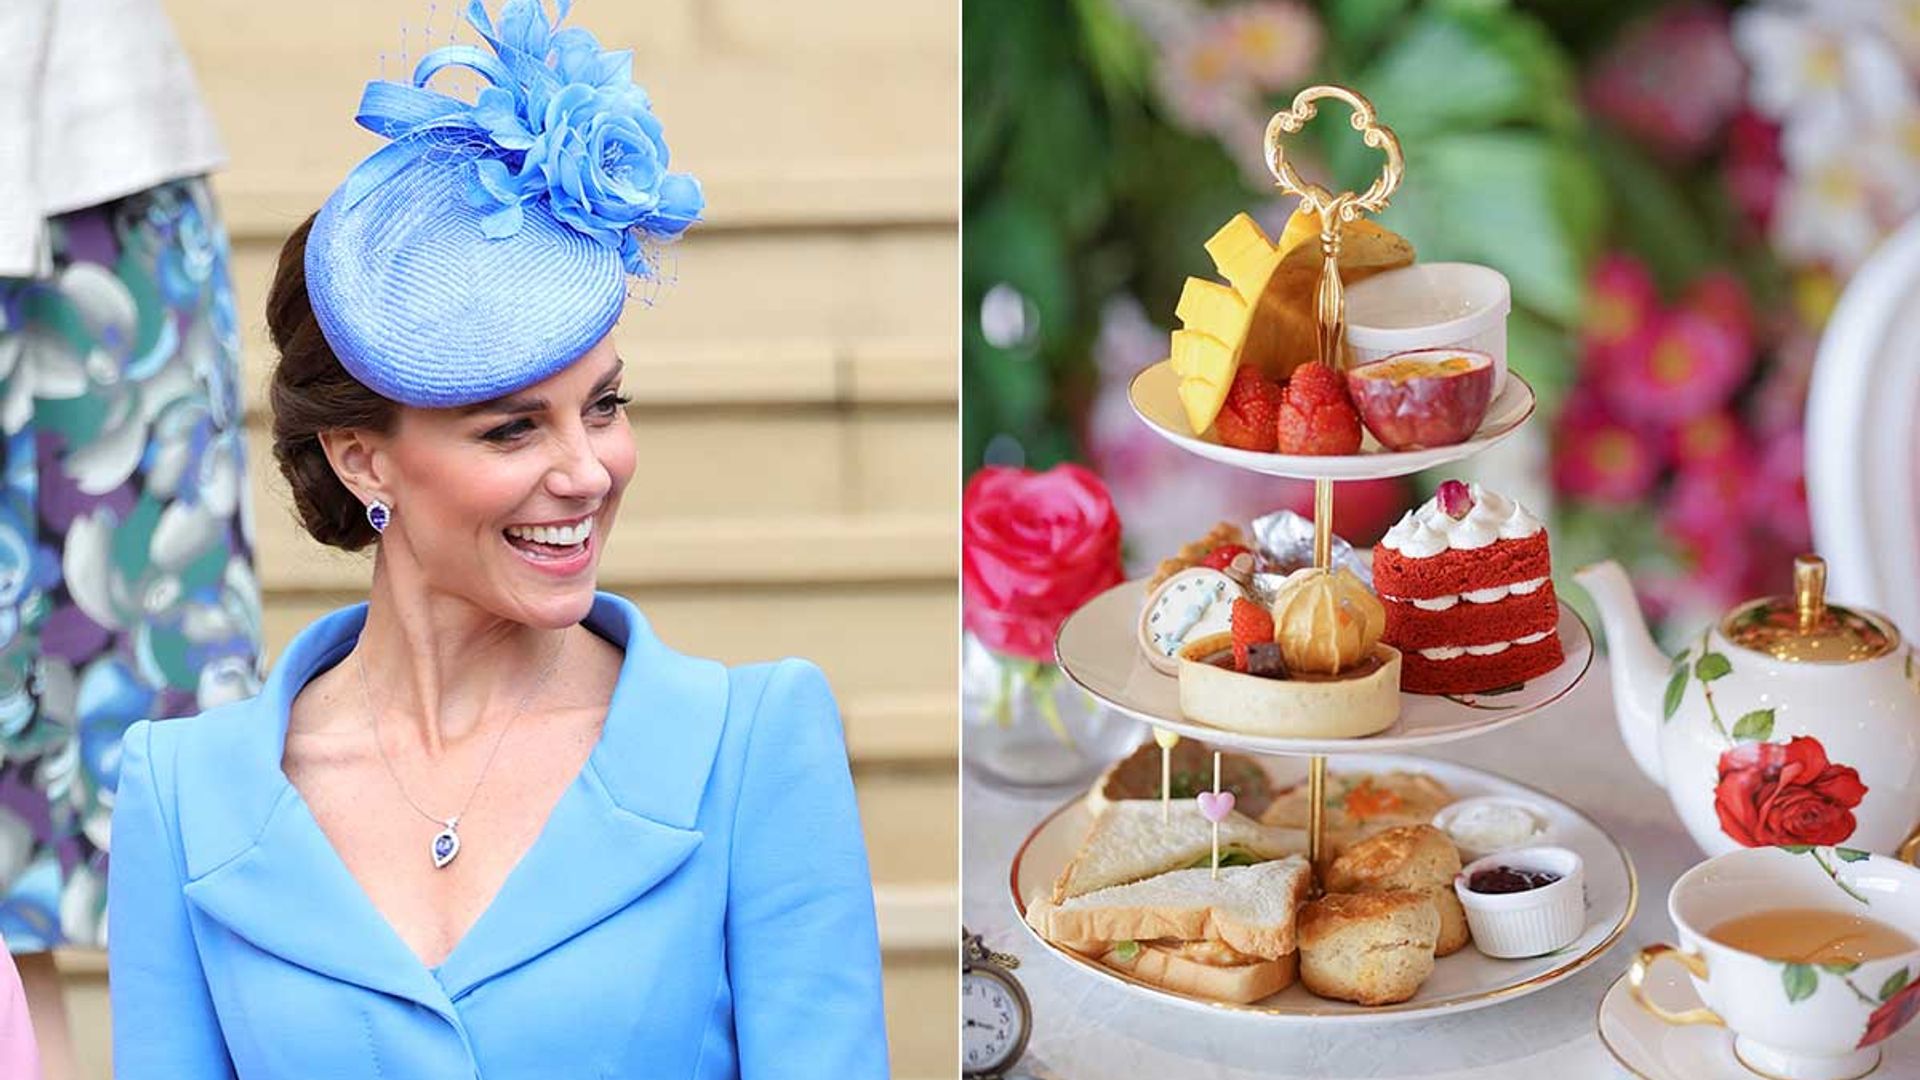 How to recreate what Sophie Wessex, Princess Eugenie and co will be eating at Royal Ascot